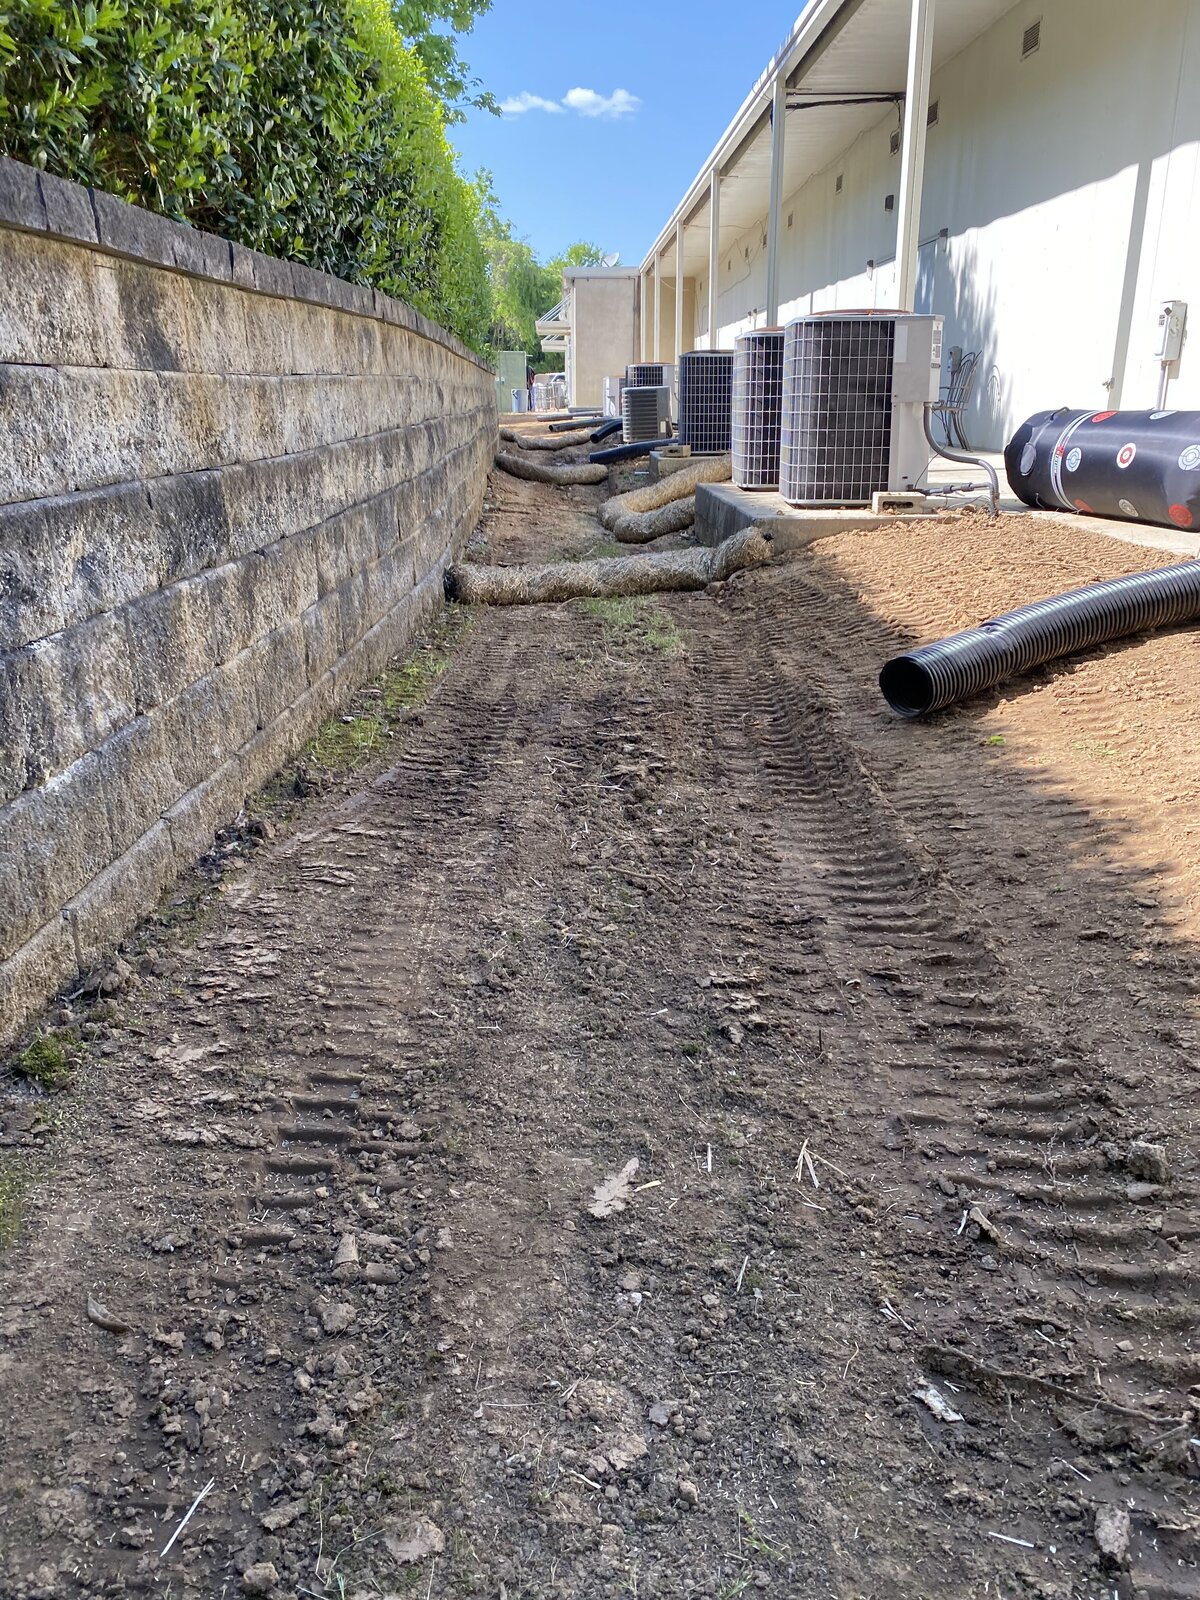 tire-tracks-in-dirt-next-to-stone-wall